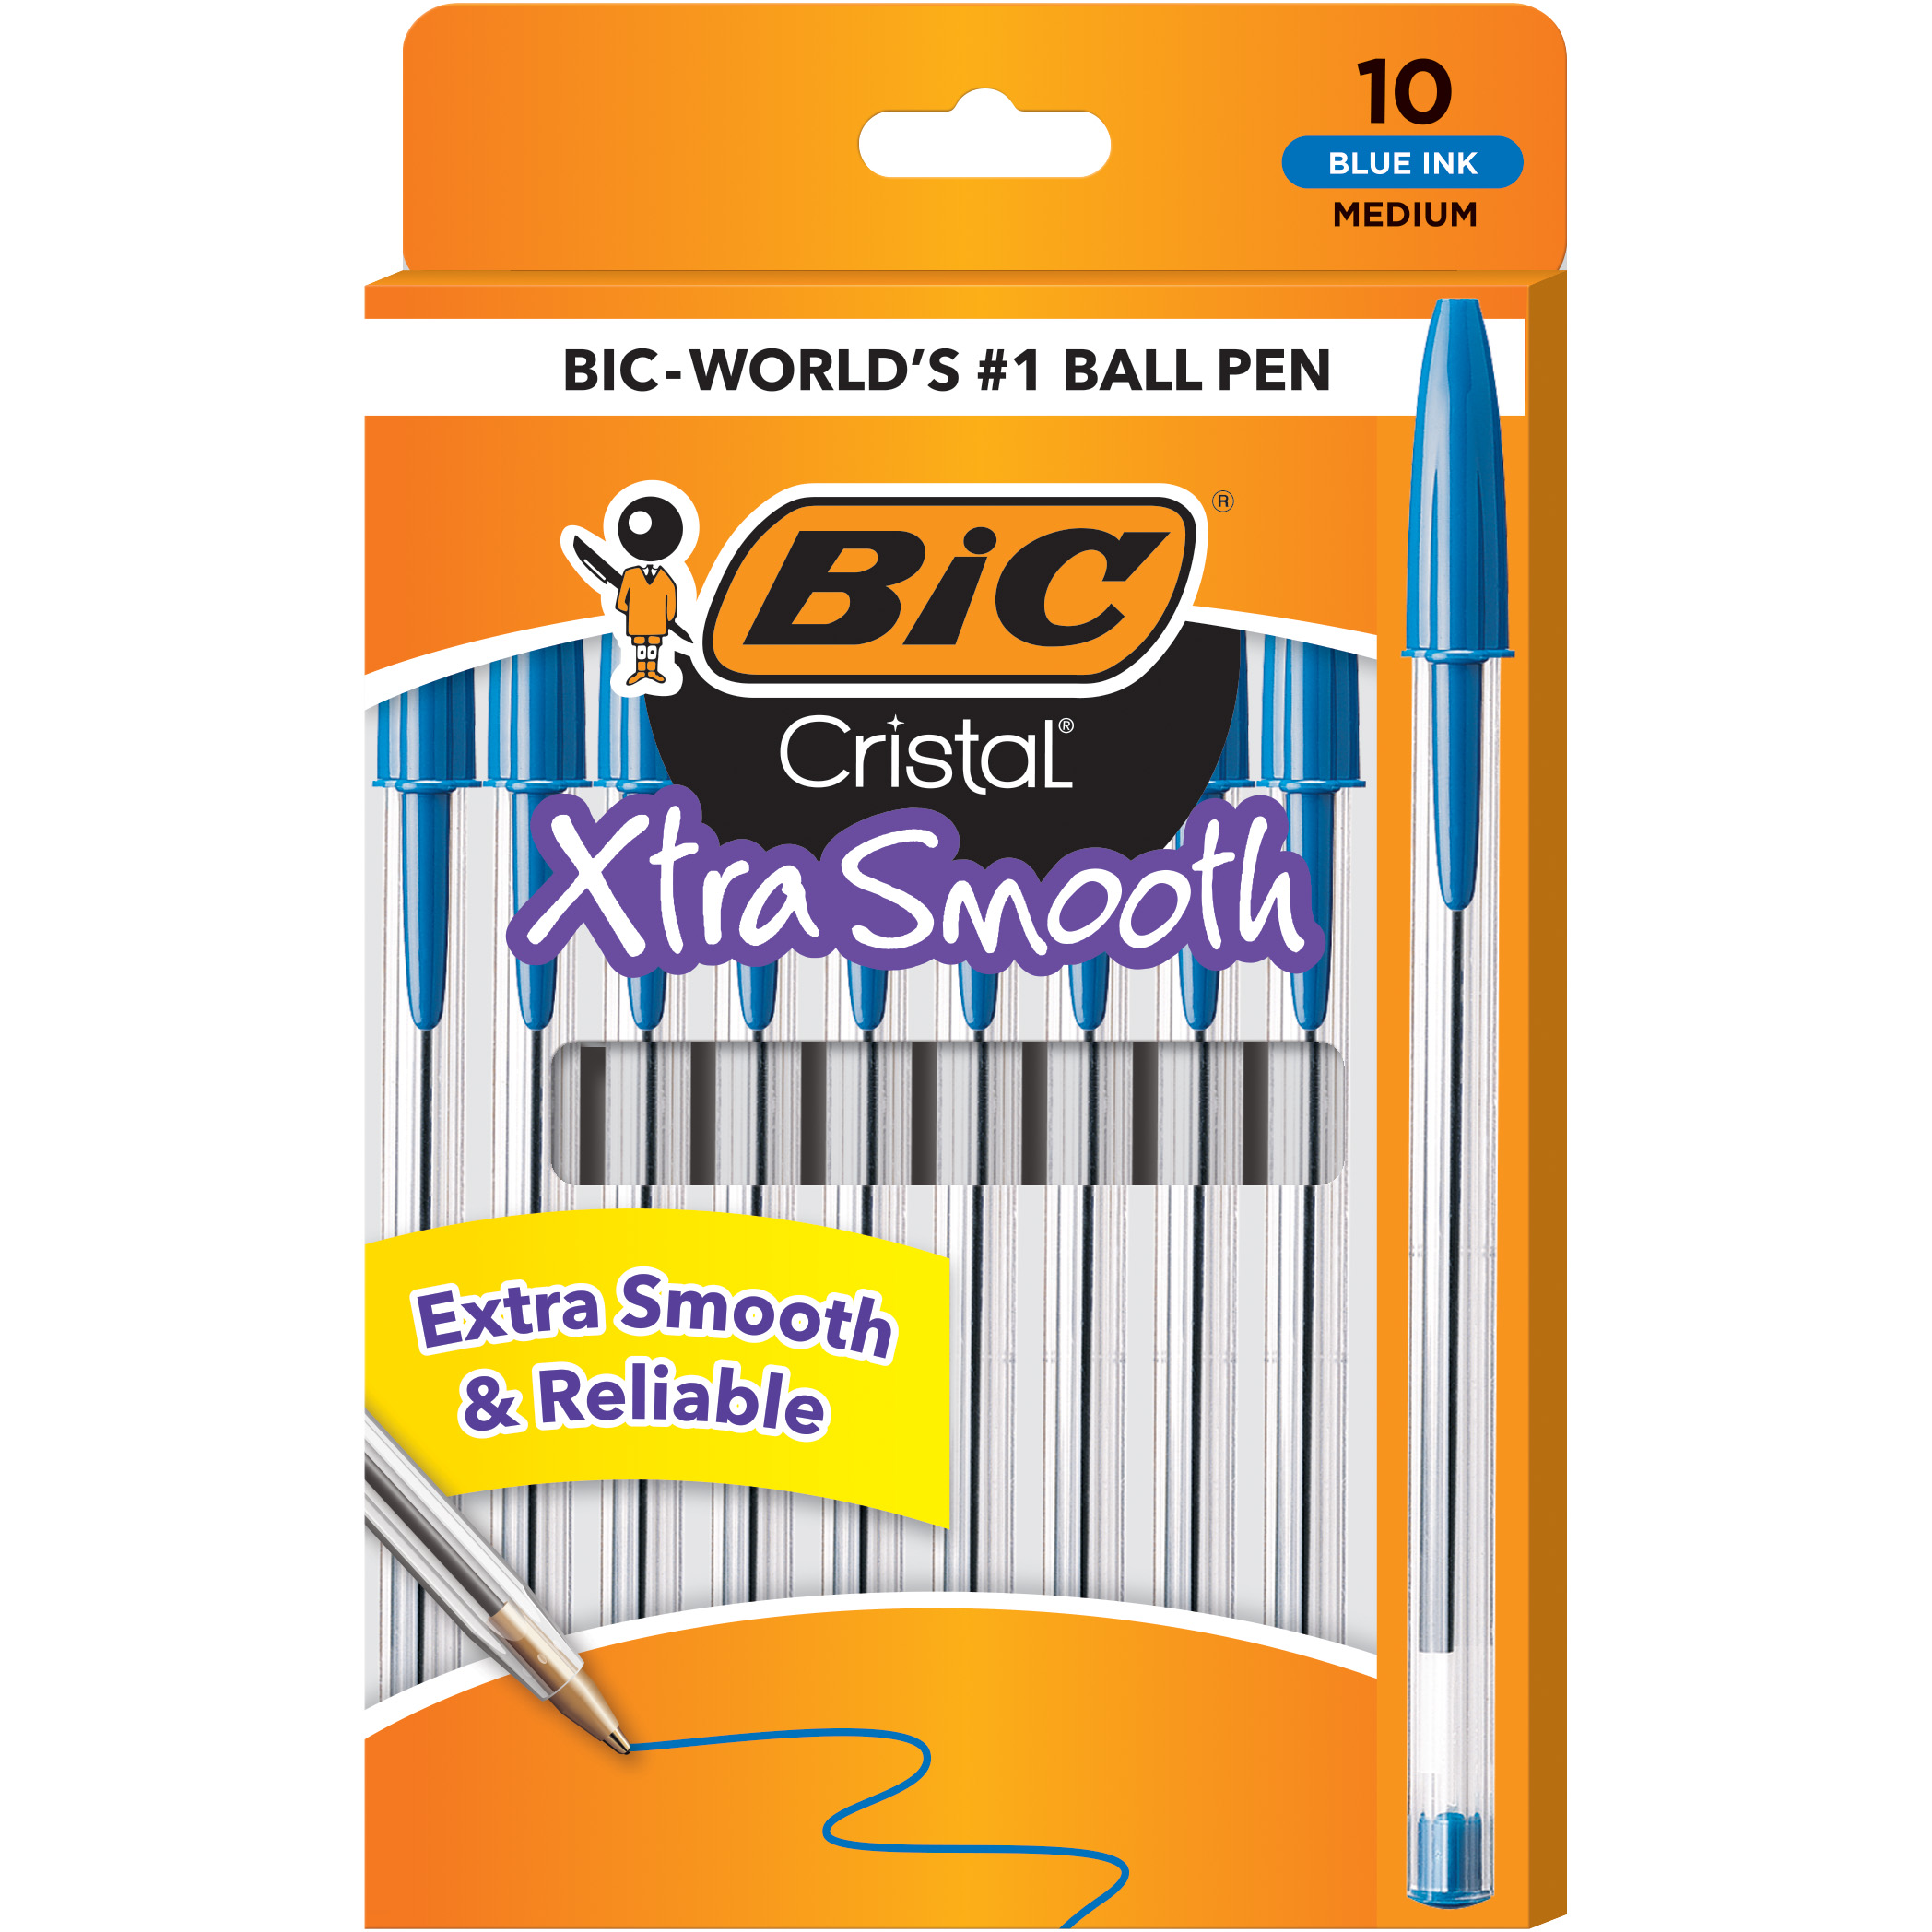 BIC Cristal Xtra Smooth Ballpoint Stick Pens, 1.0 mm, Blue Ink, Pack of 10 - image 1 of 10